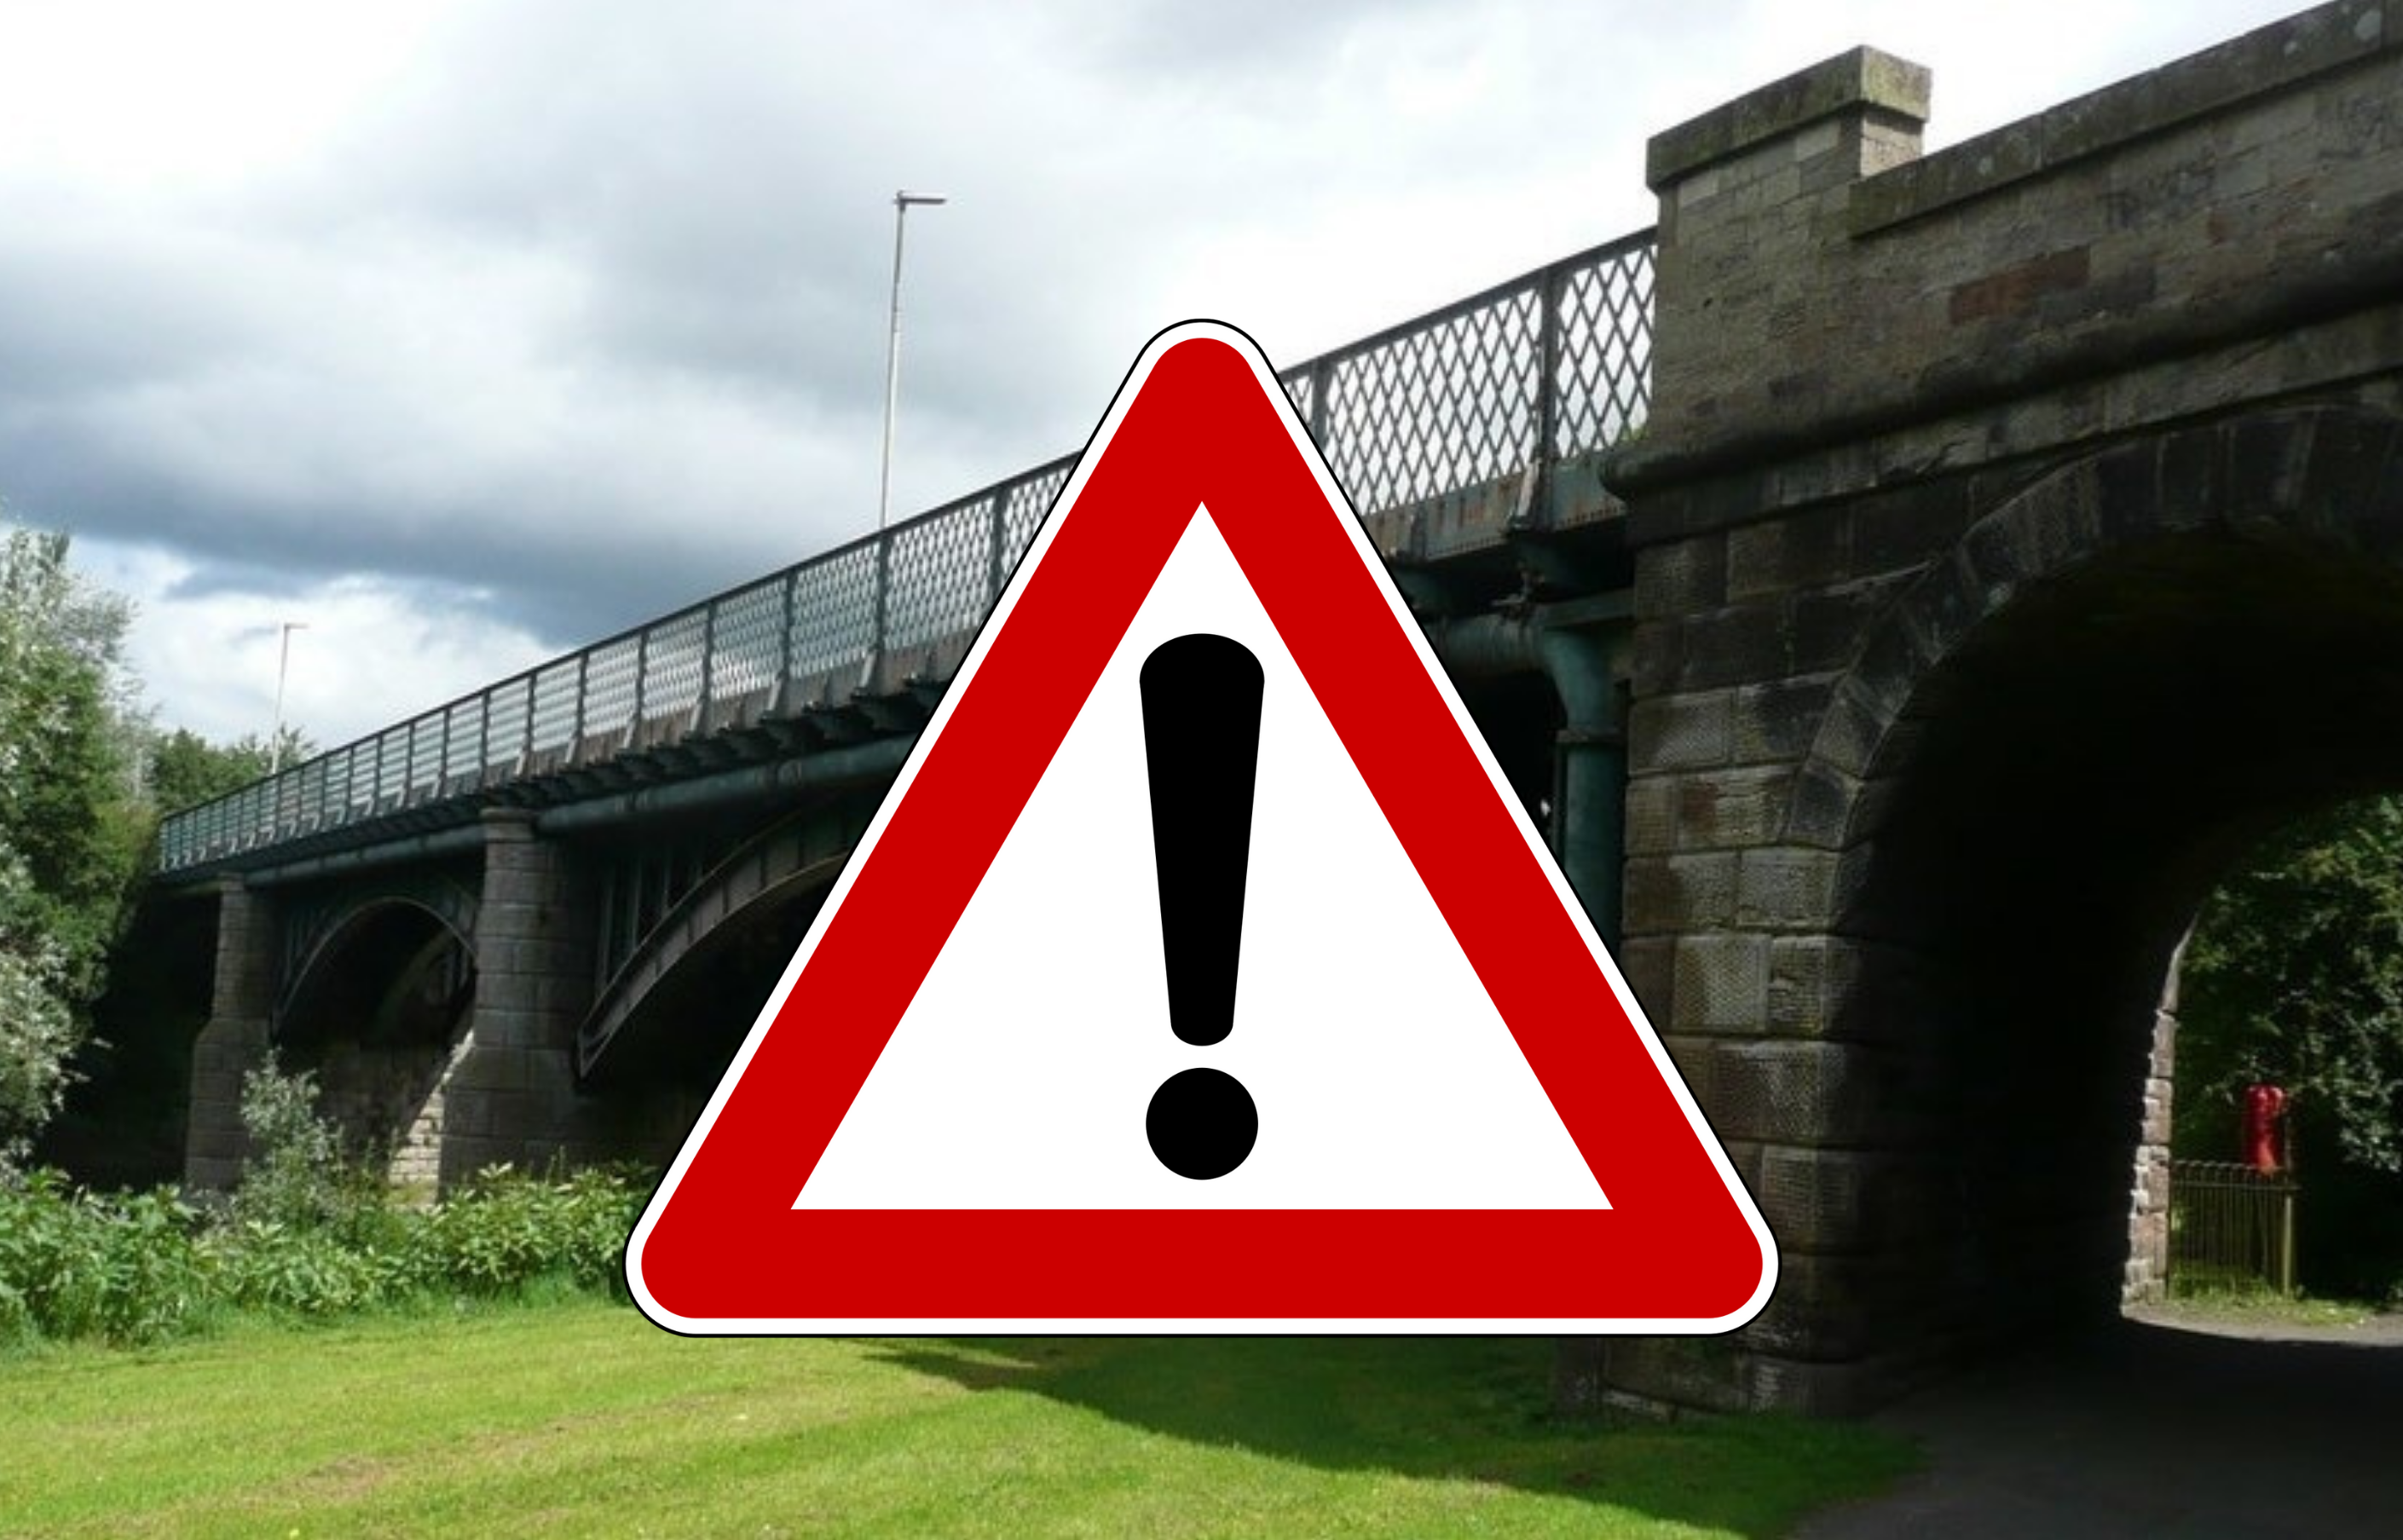 NEWS | This bridge in Hereford will soon have a weight restriction limit – THIS IS WHY